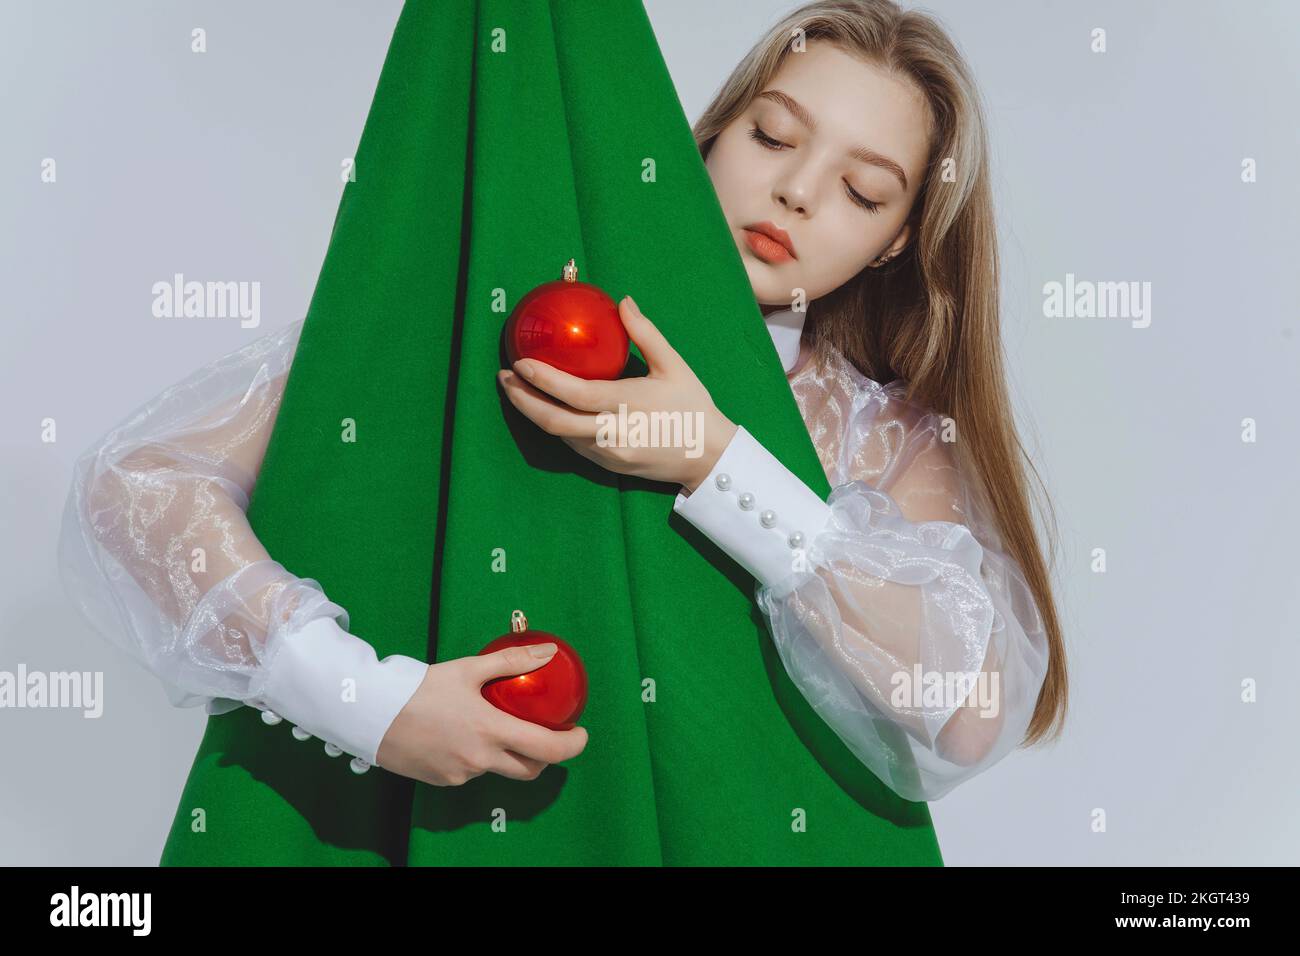 Girl holding red baubles embracing abstract Christmas tree against white background Stock Photo